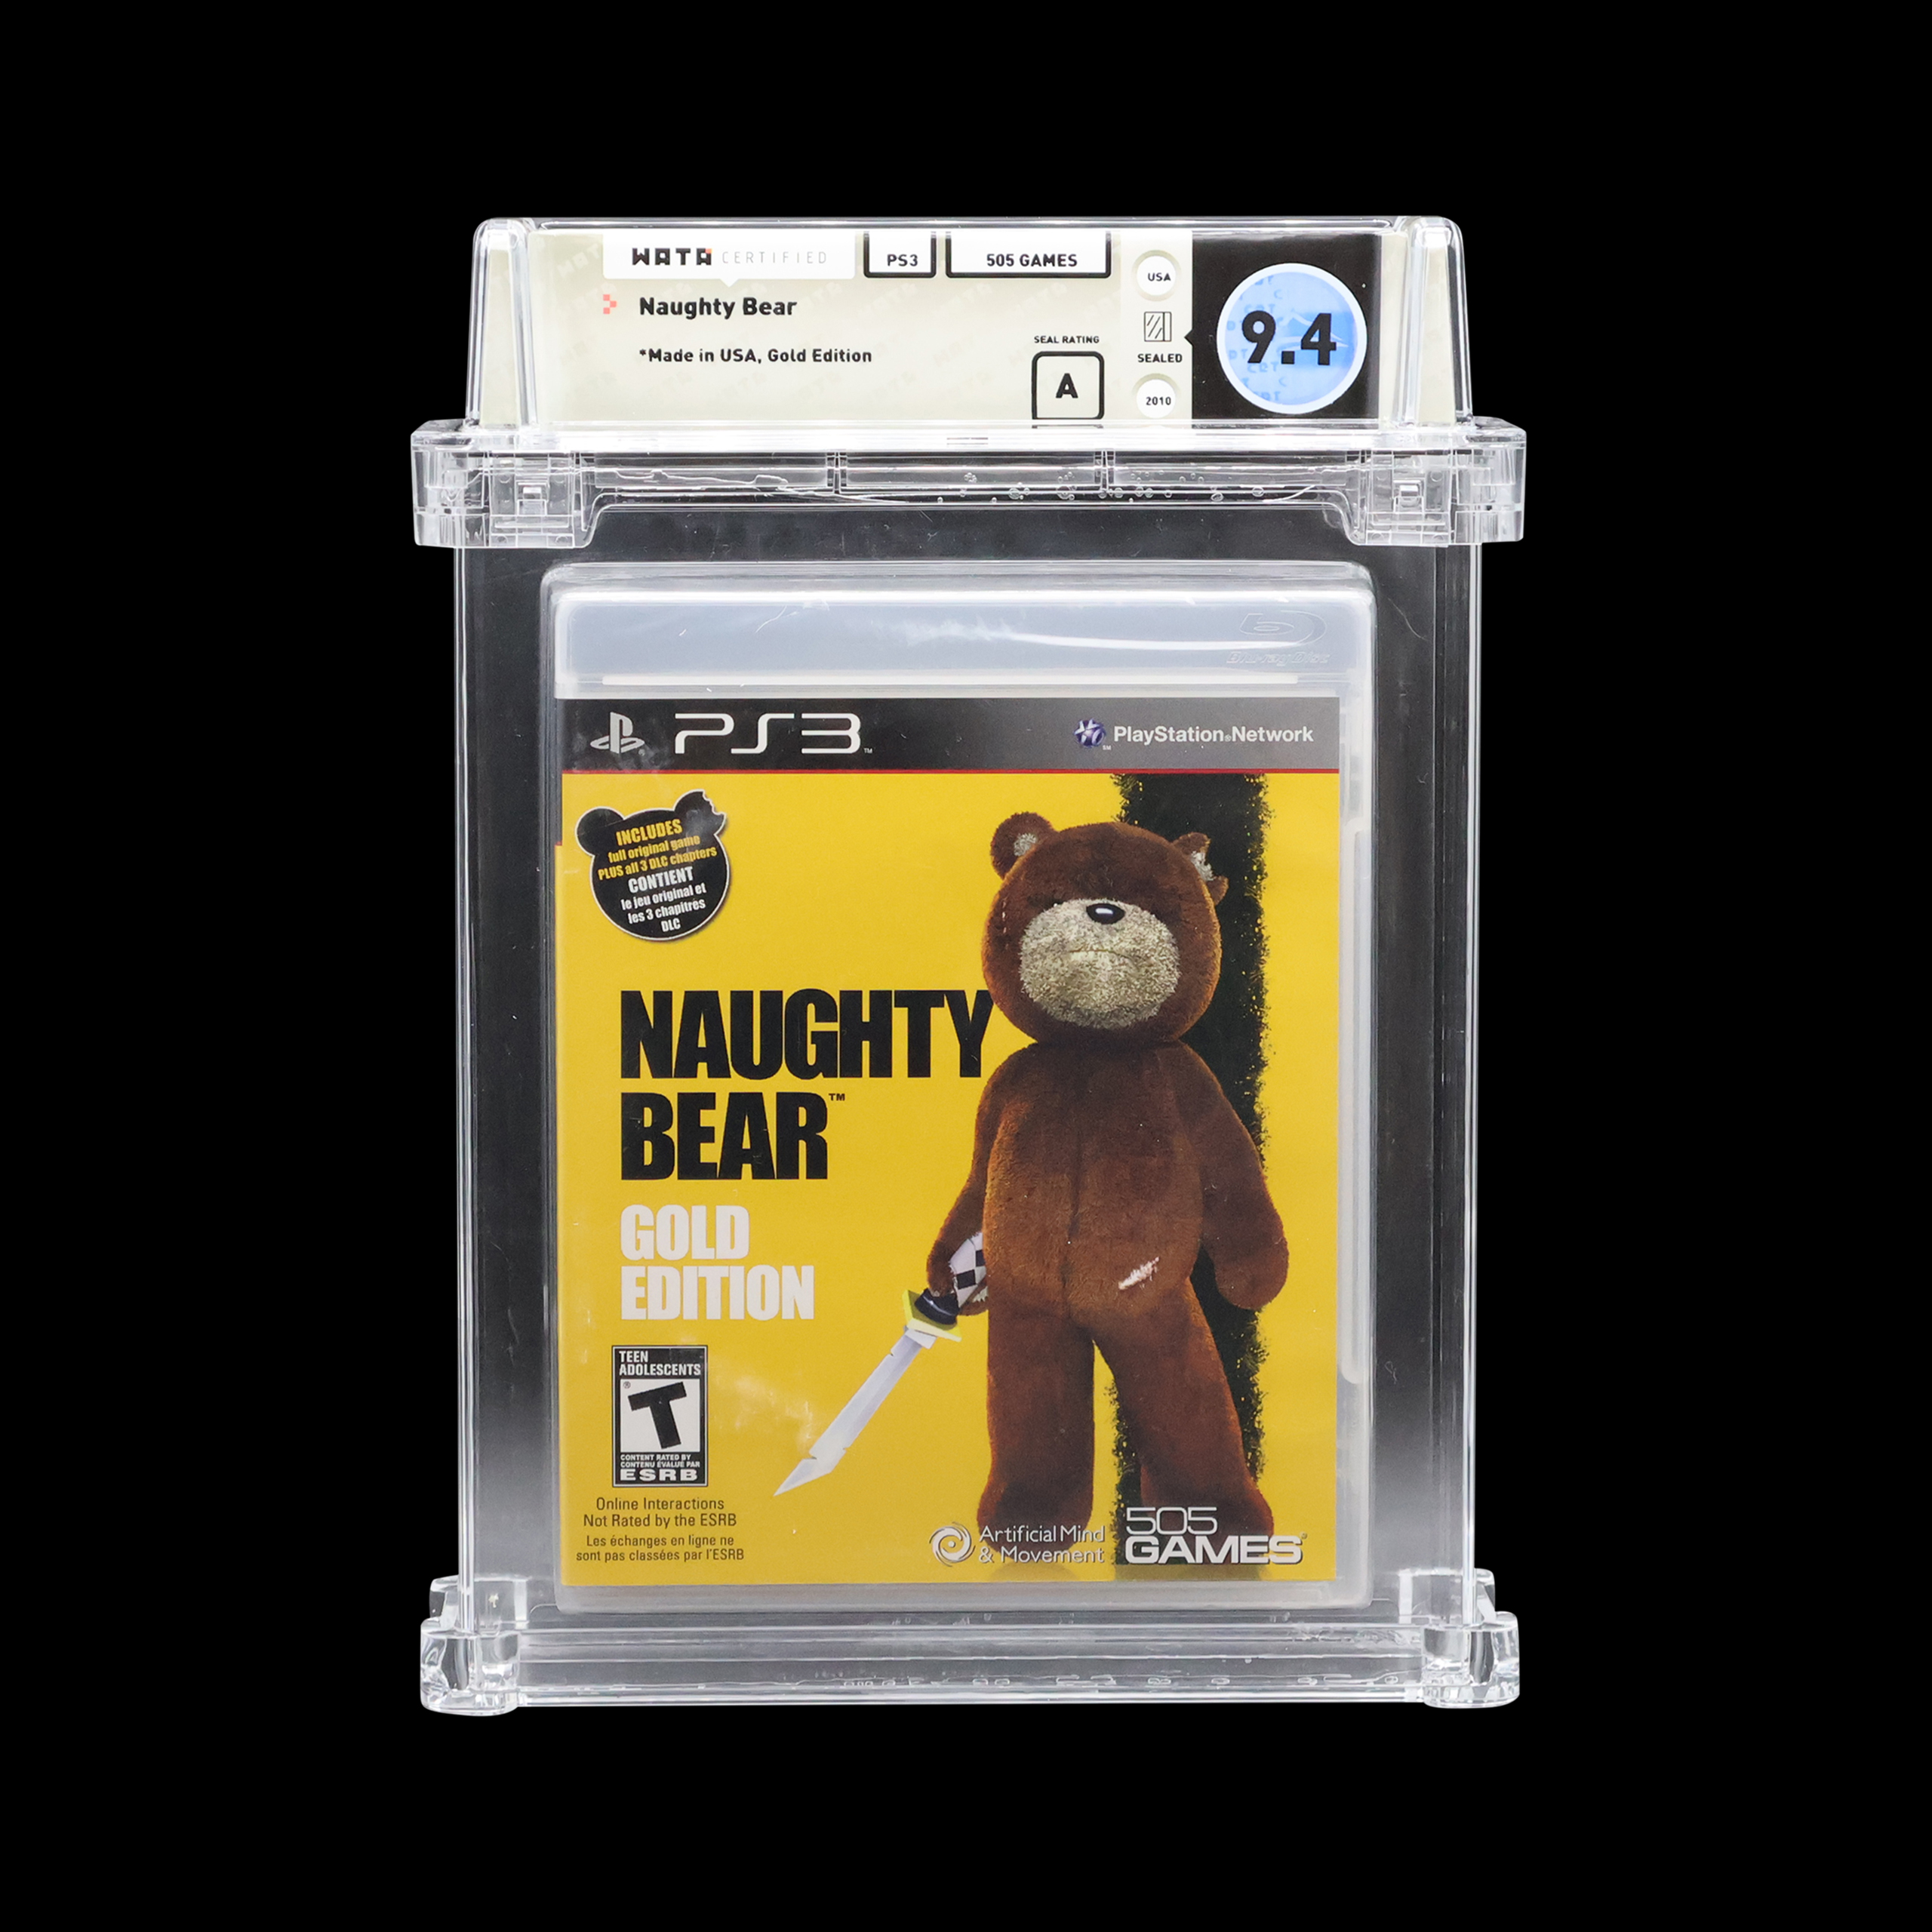 Sealed Naughty Bear Gold Edition PS3 game, graded 9.4 by WATA.